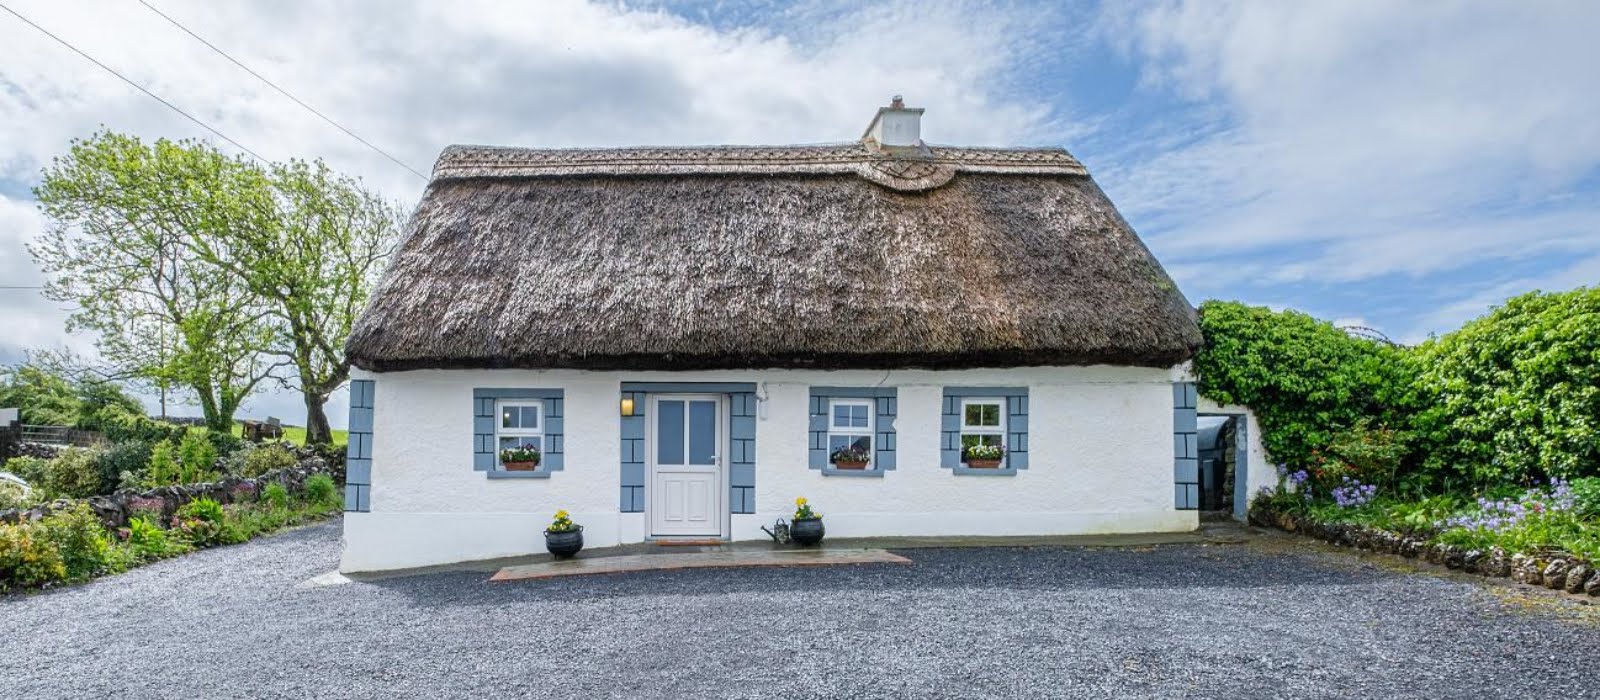 This deceptively spacious thatched cottage in Co Galway is on the market for €480,000